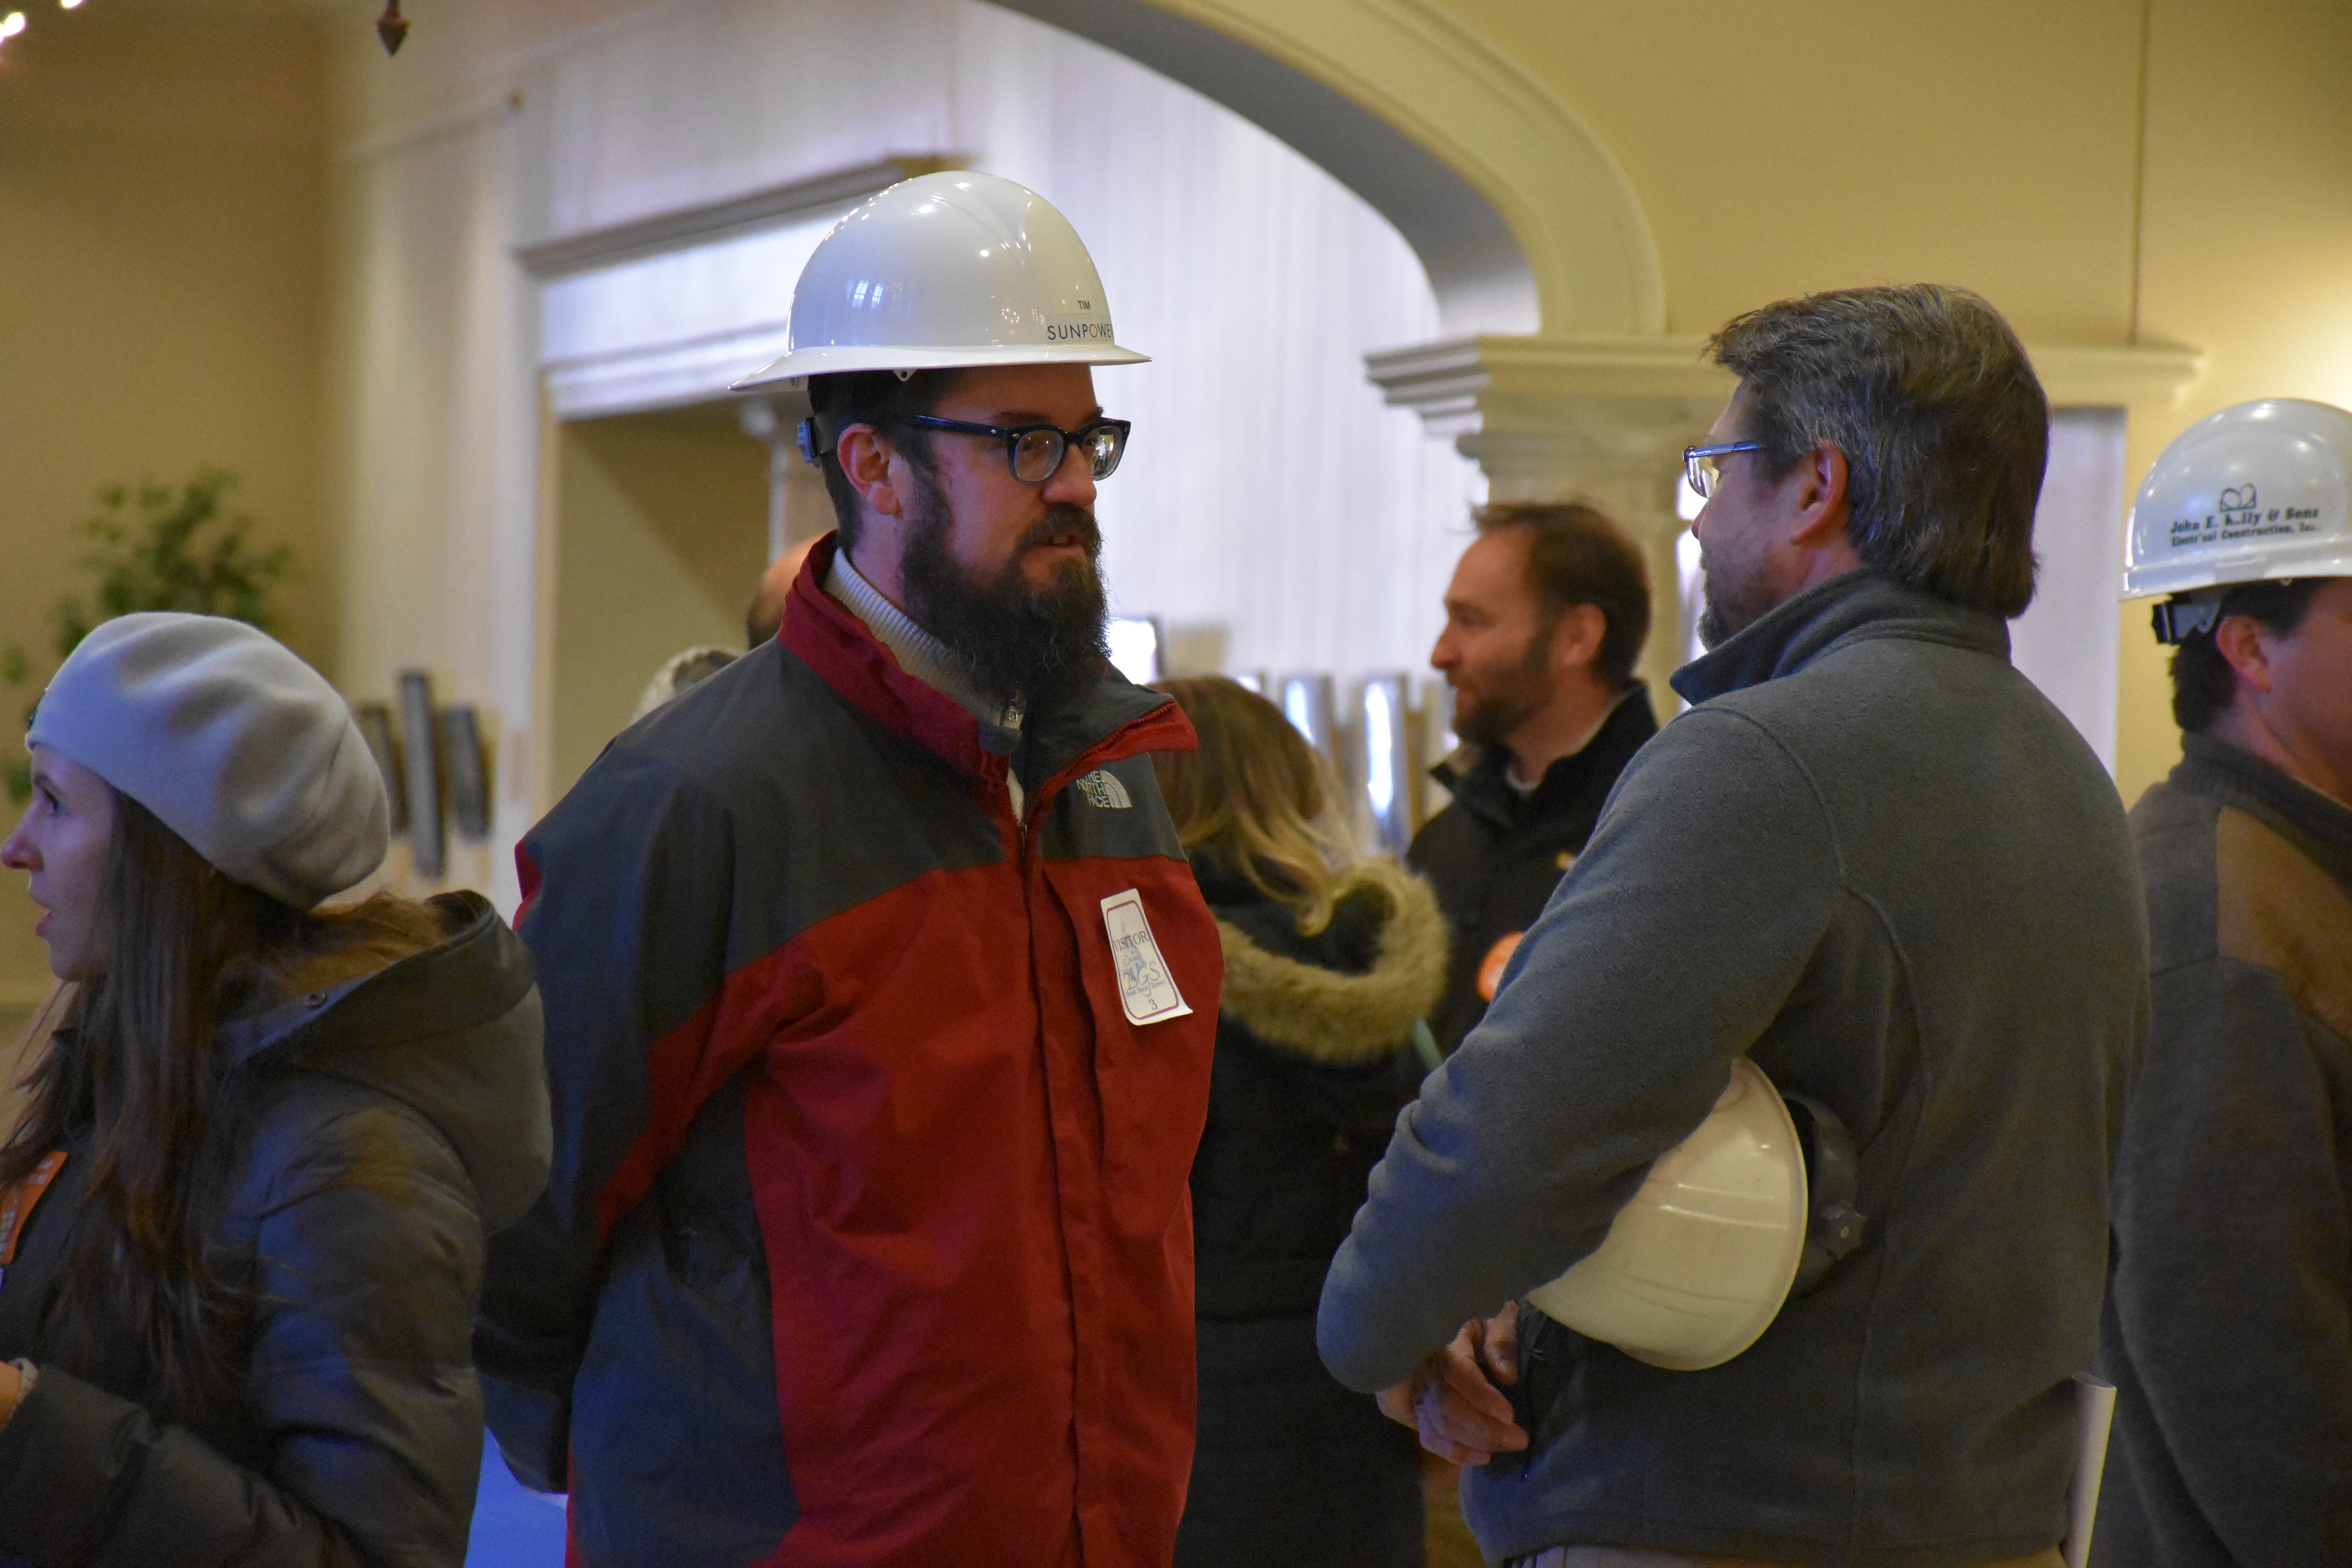 Solar workers Tim Gillen, left, and Harry Benson arrive in Annapolis on Thursday, February 11, 2016, to show support for pending legislation that would require electric companies to reduce the time it takes to connect customers’ energy panels to their power grids. (Capital News Service photo by Leo Traub)